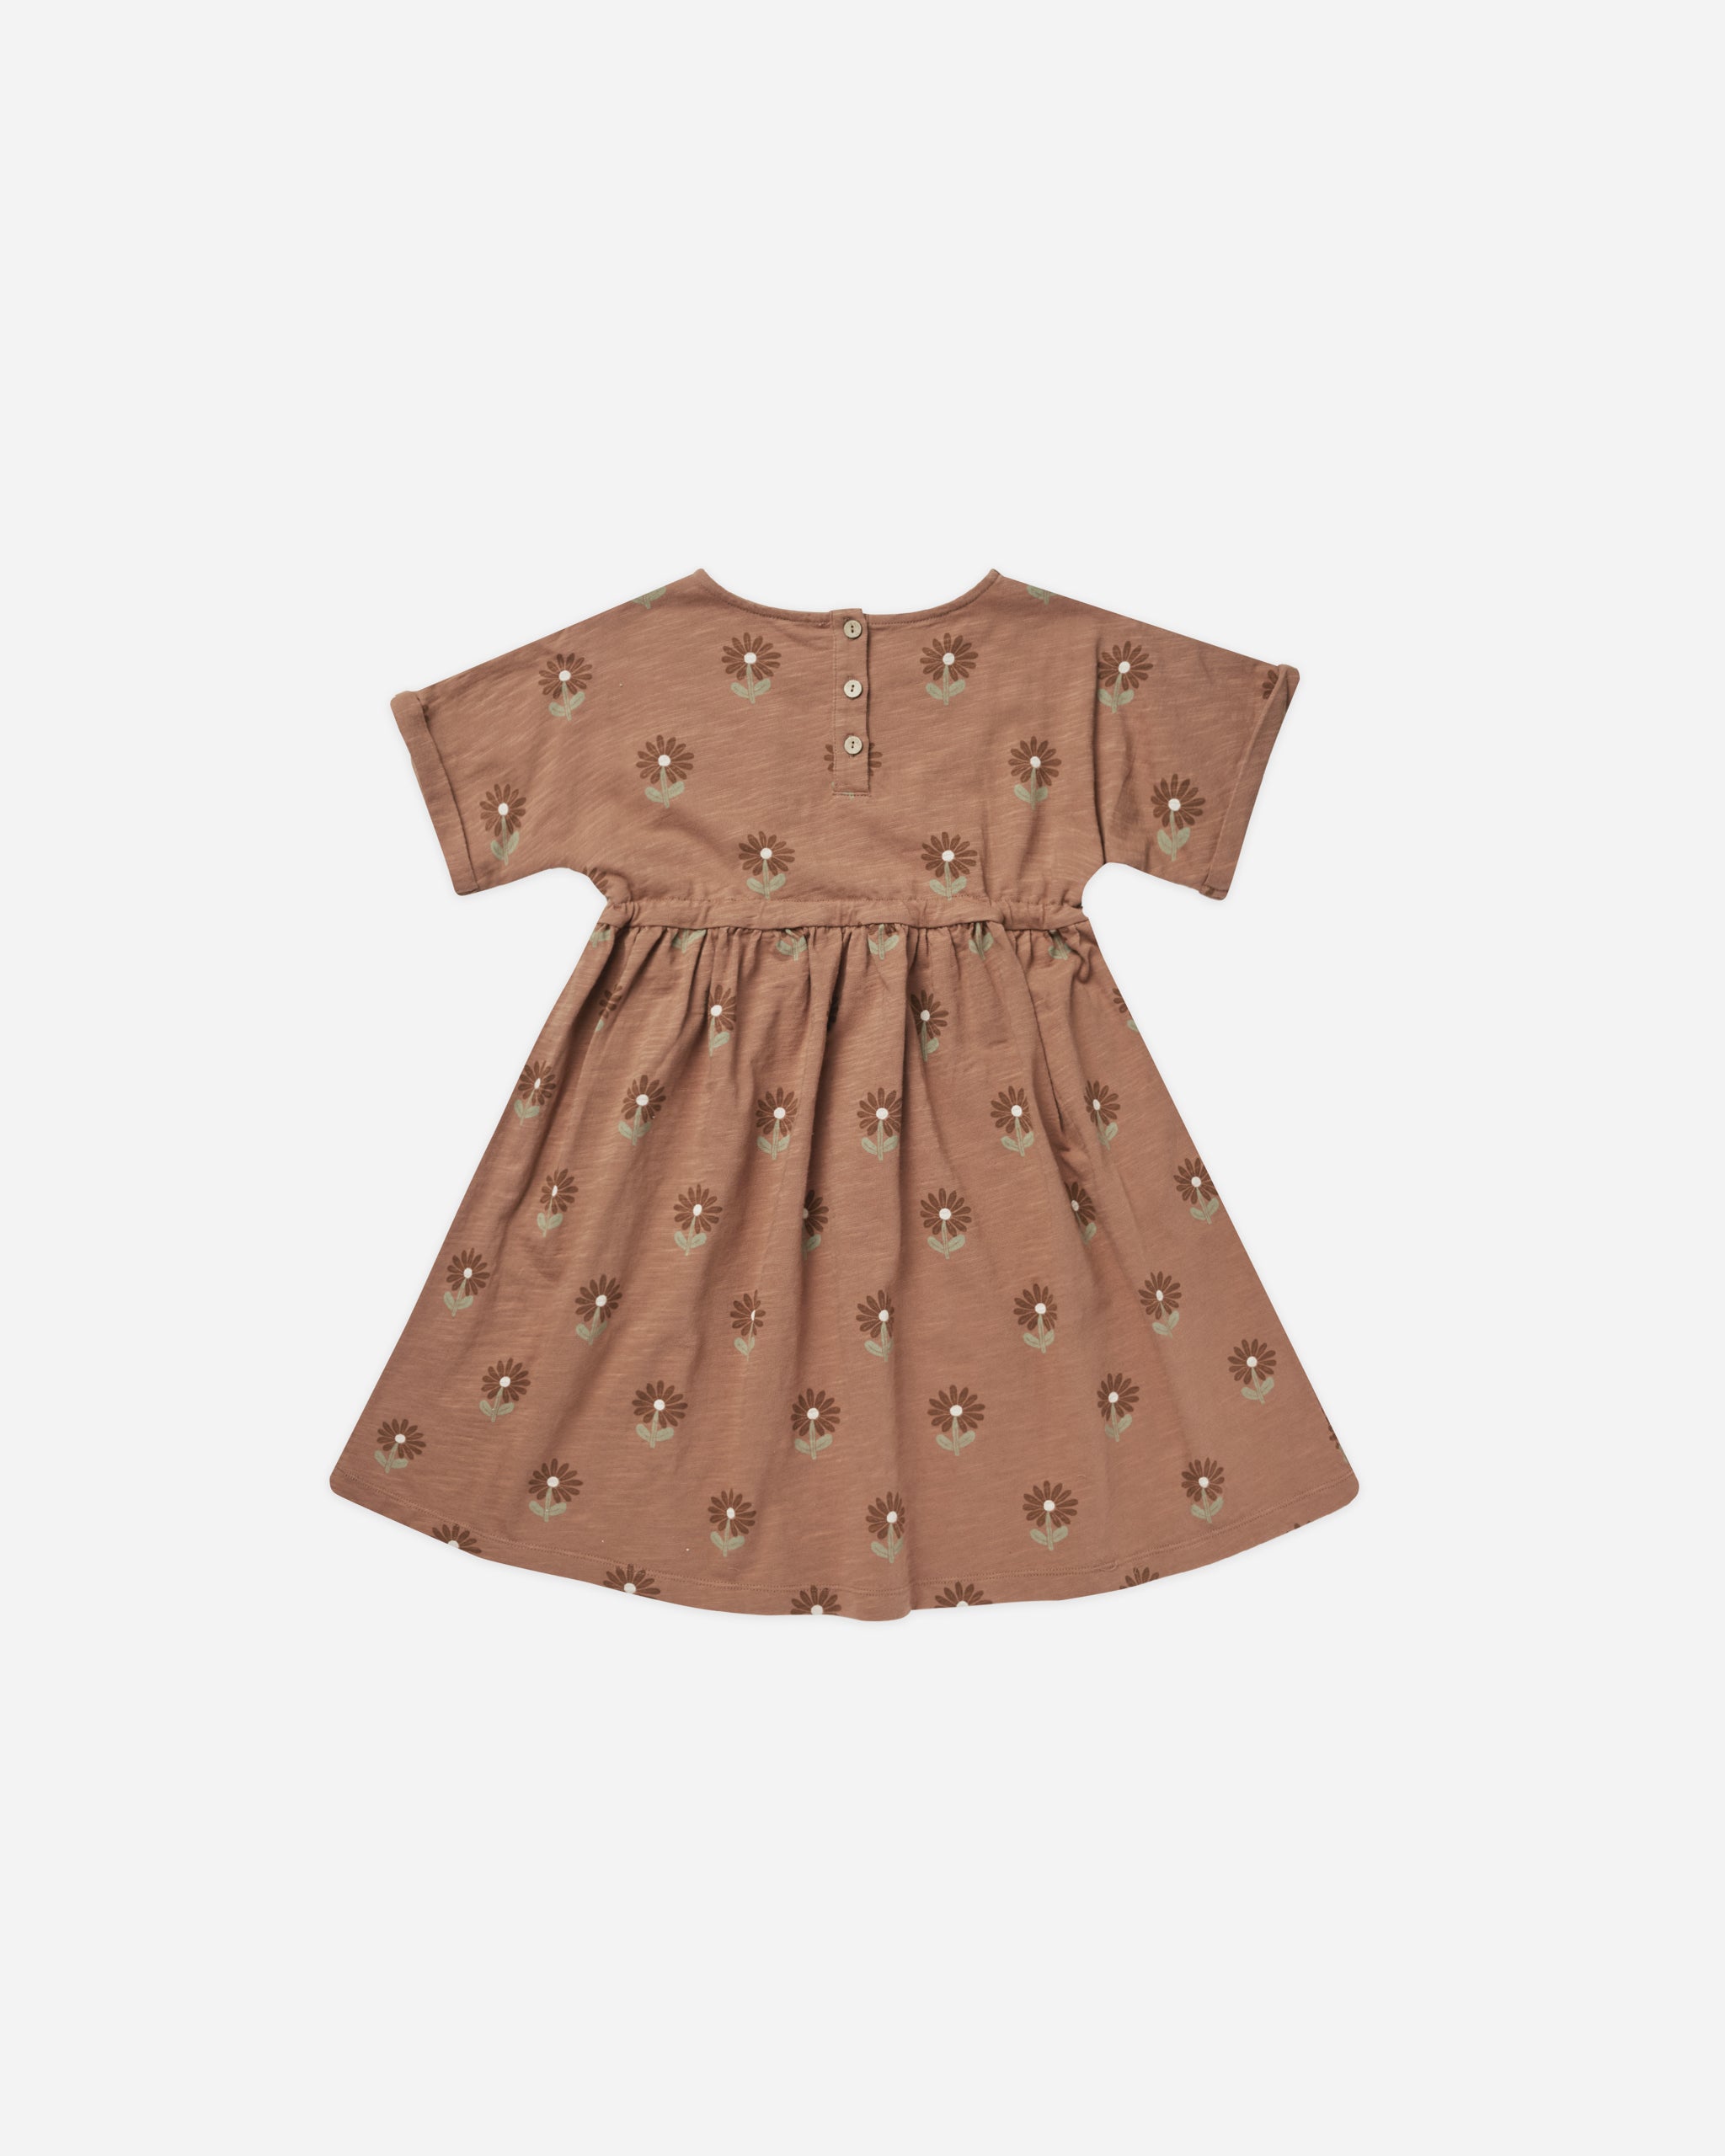 Kat T-Shirt Dress || Sunflower - Rylee + Cru | Kids Clothes | Trendy Baby Clothes | Modern Infant Outfits |